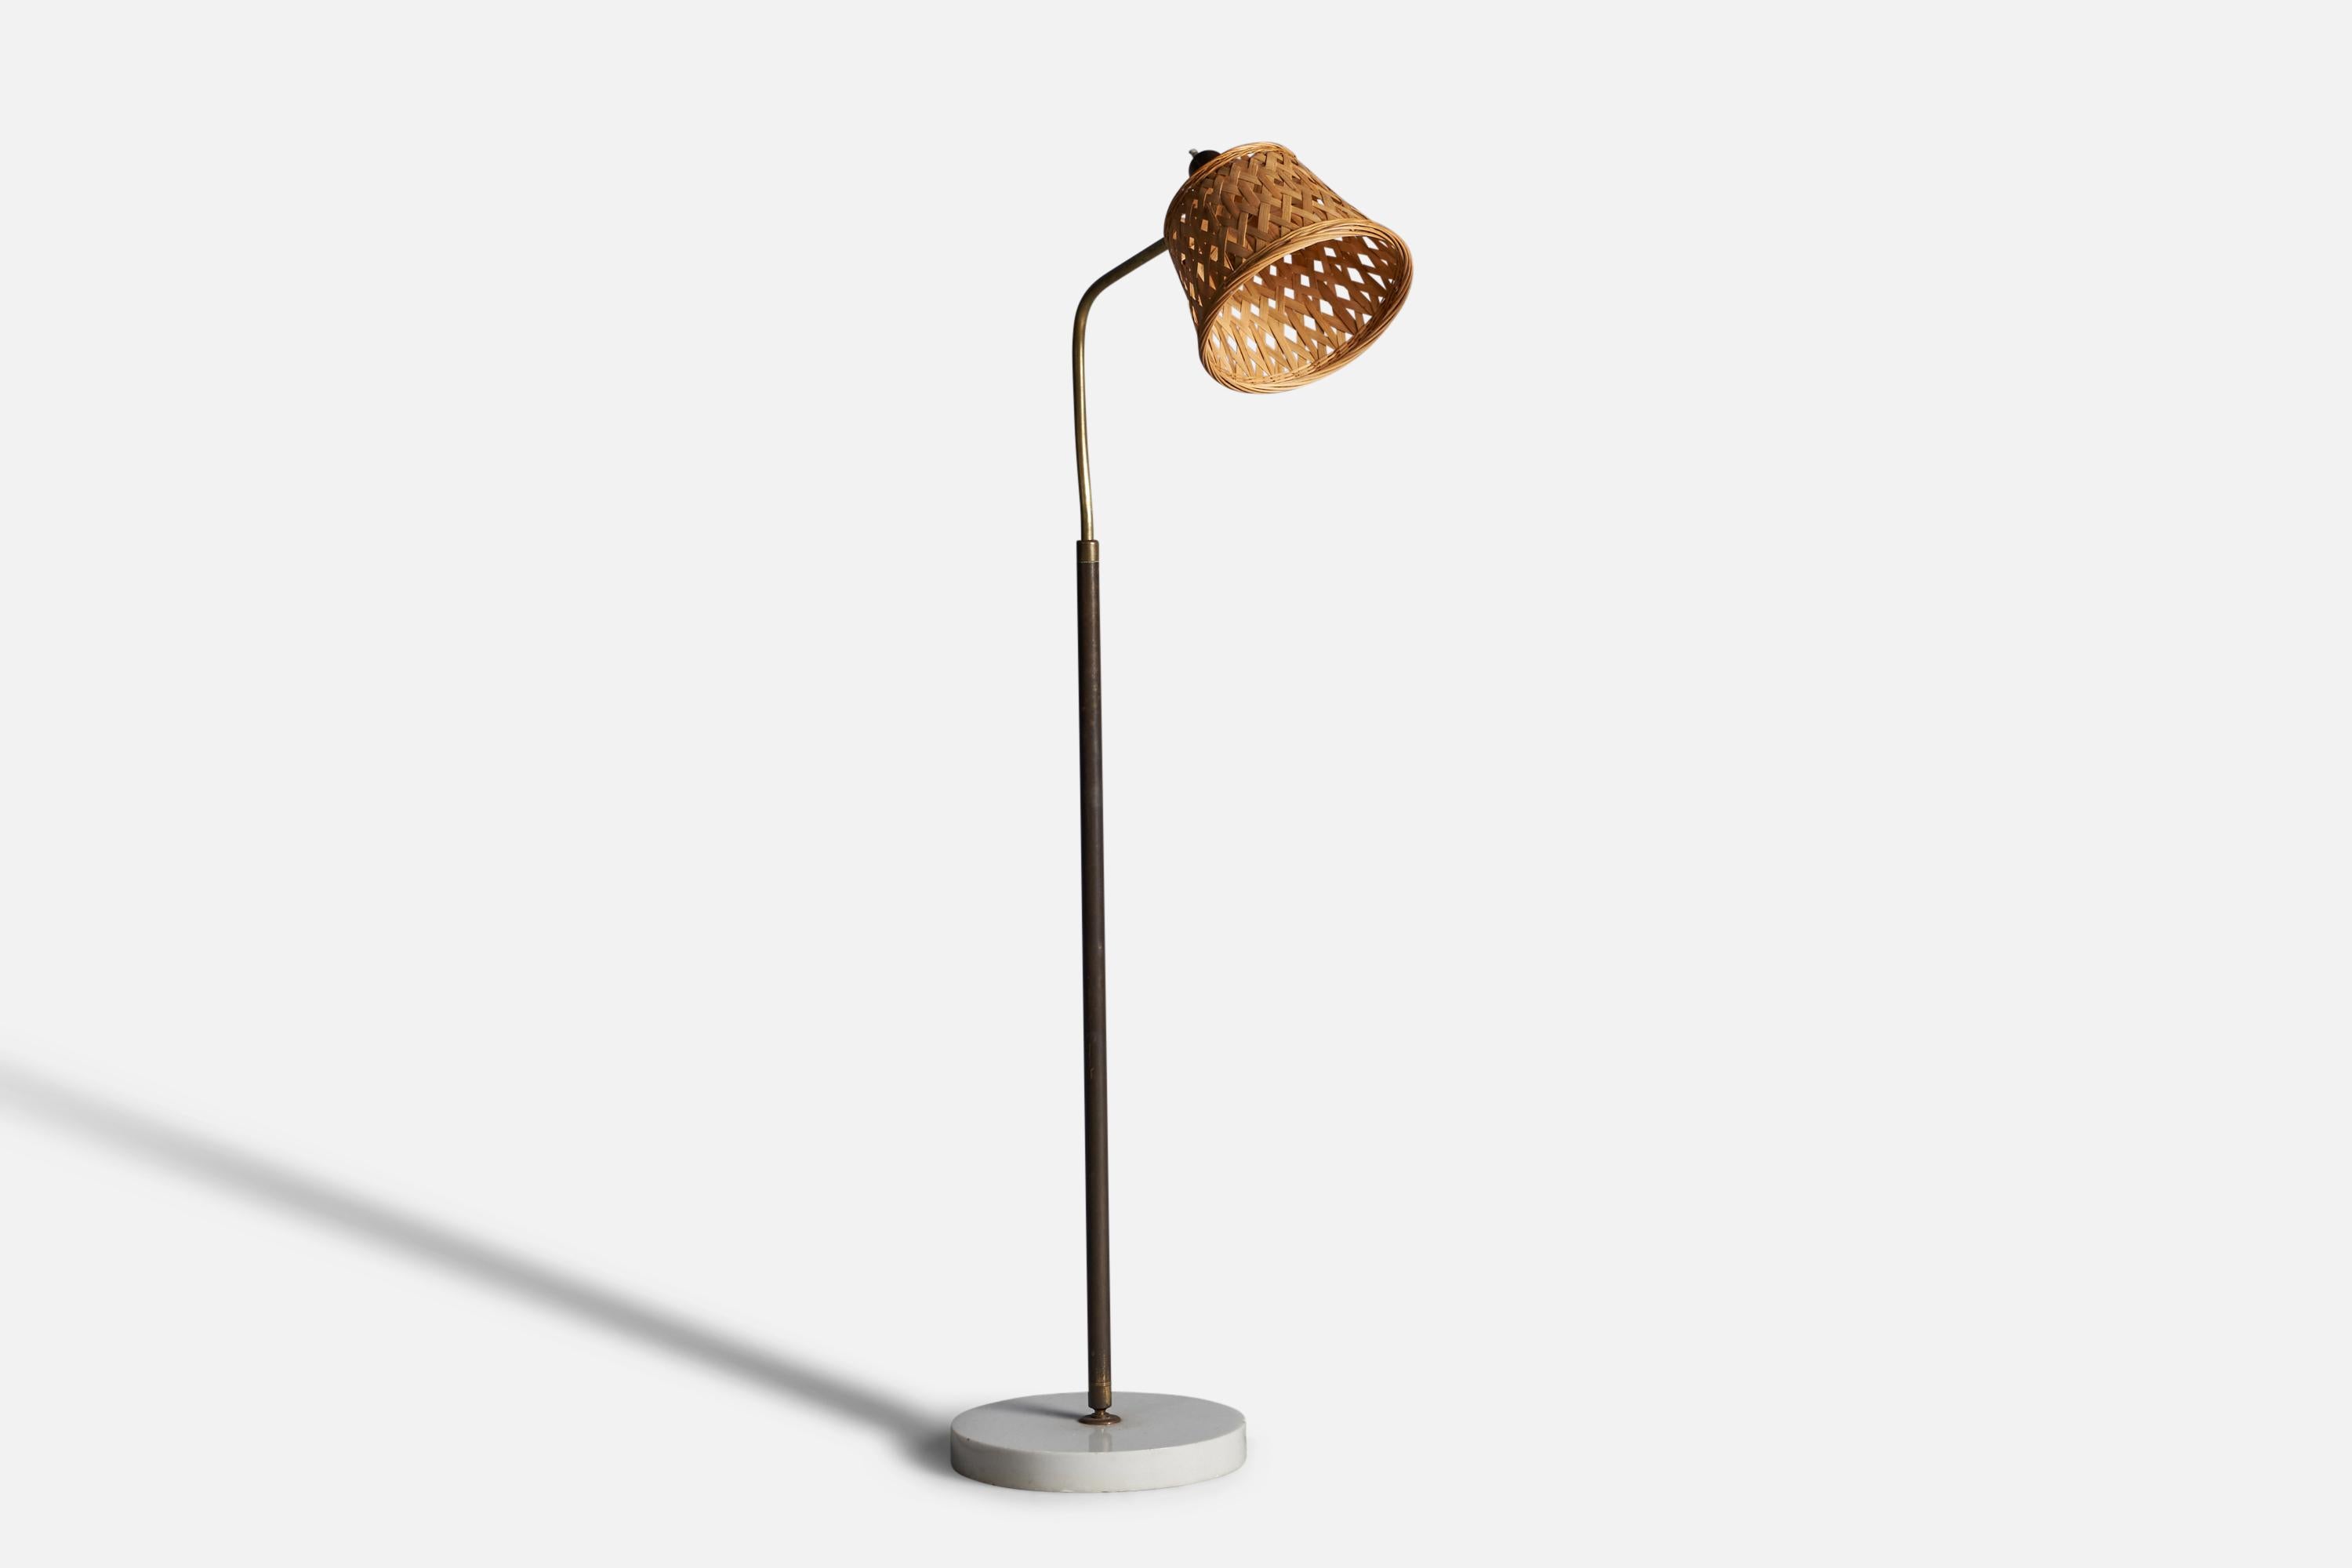 An adjustable brass, marble and rattan floor lamp, designed by Giuseppe Ostuni, and produced by O-Luce, Italy, 1950s.

Overall Dimensions: 51